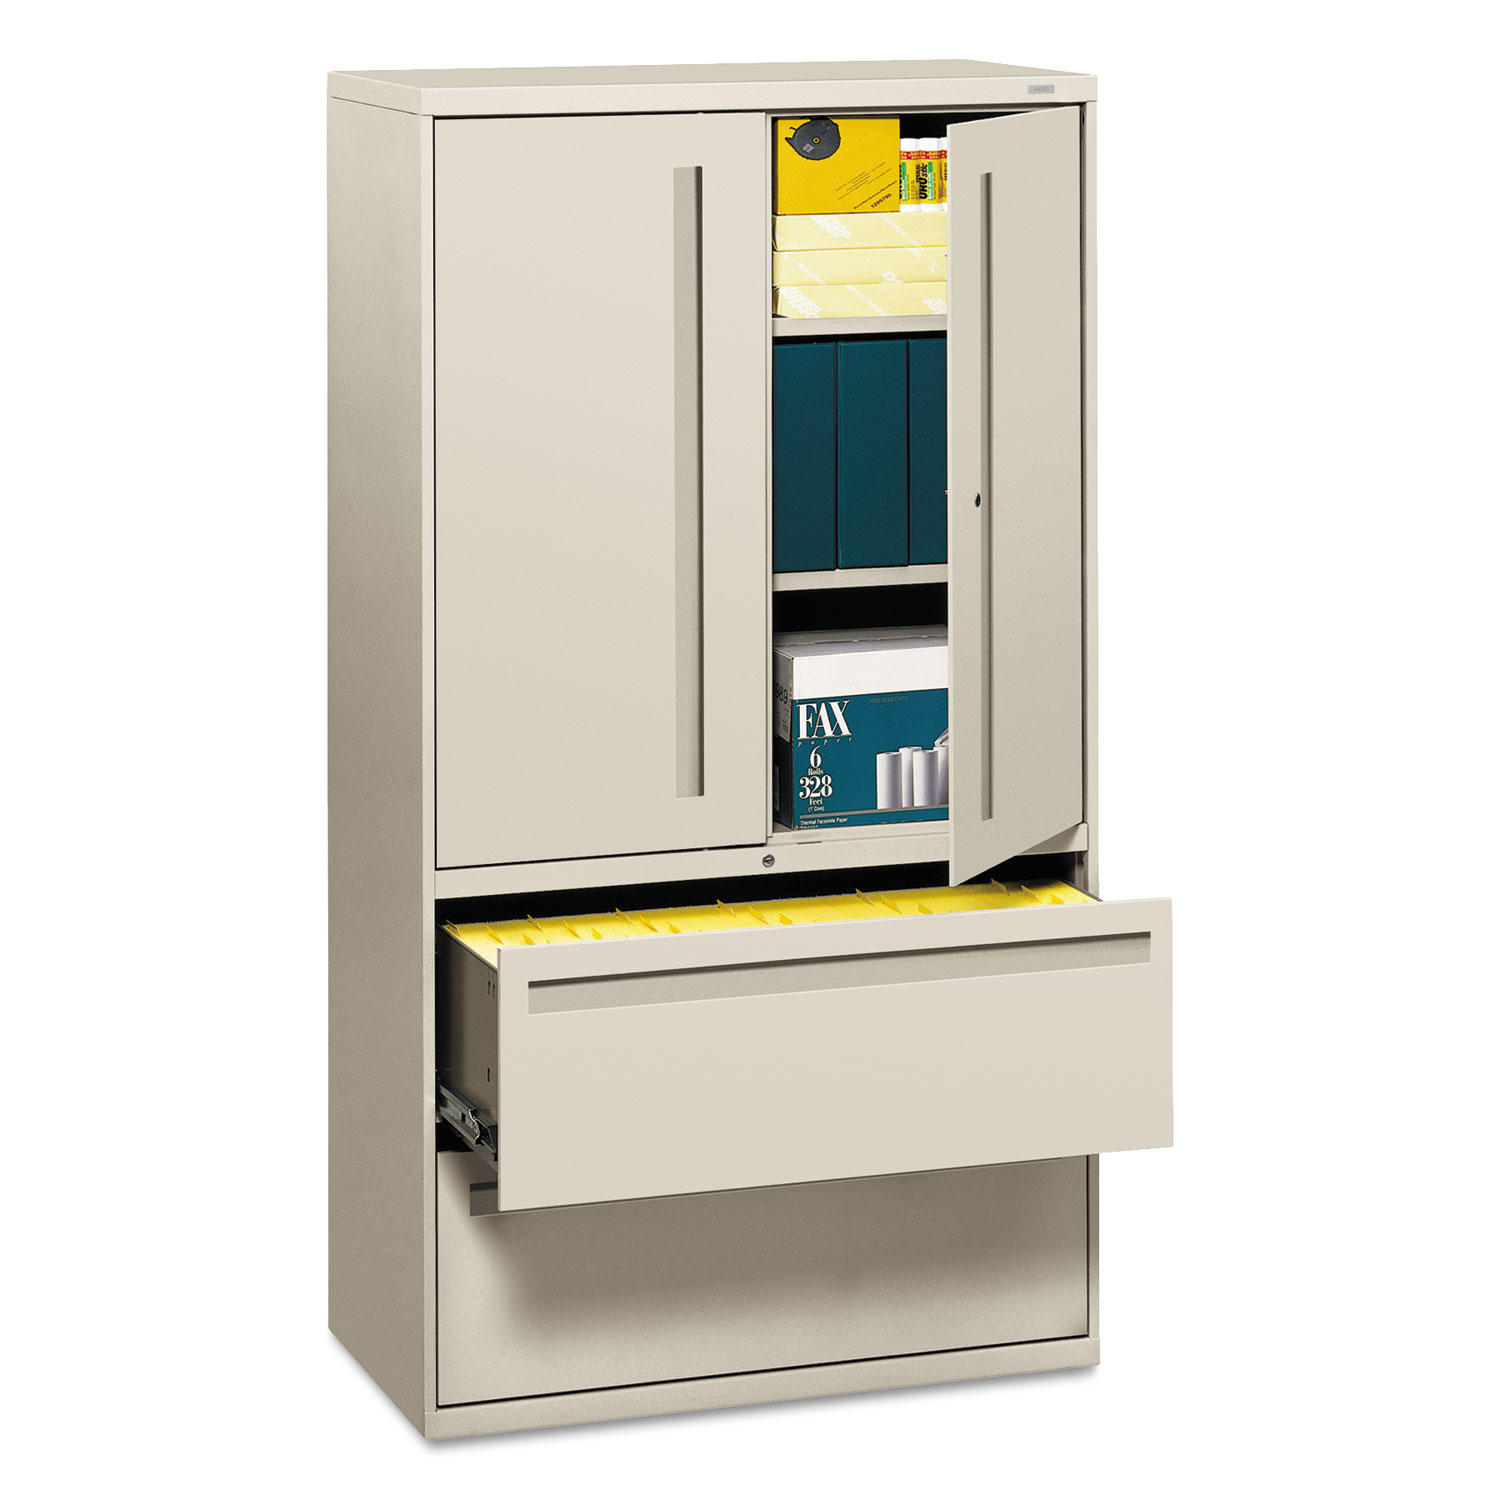  HON H785LS.L.Q 700 Series Lateral File with Storage Cabinet, 36w x 18d x 64.25h, Light Gray (HON785LSQ) 